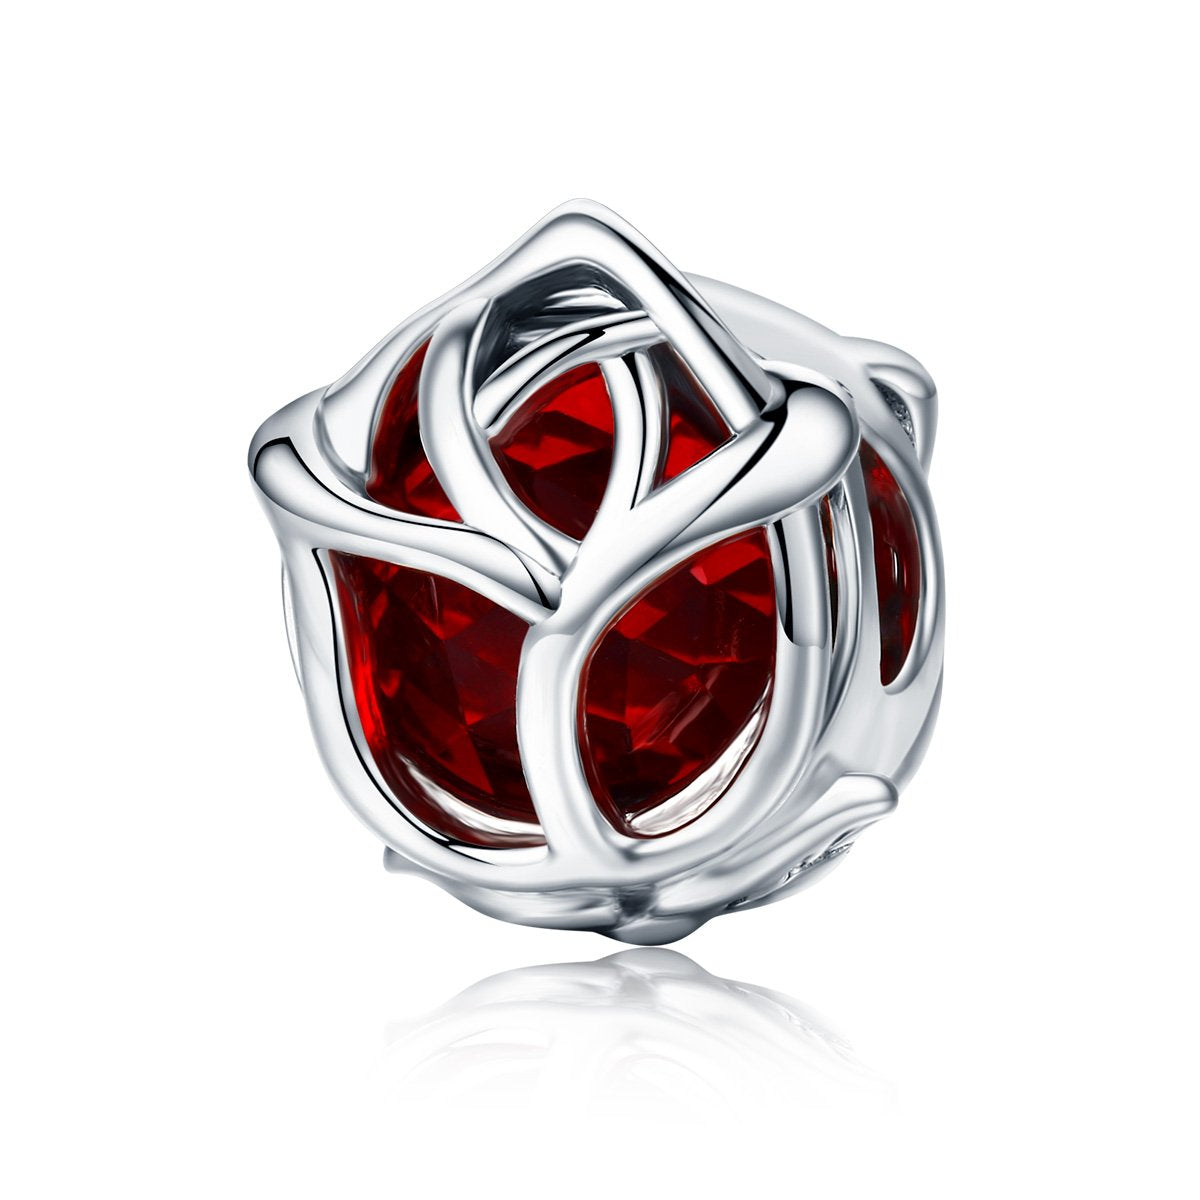 Sterling 925 silver charm the red rose bead pendant fits Pandora charm and European charm bracelet Xaxe.com